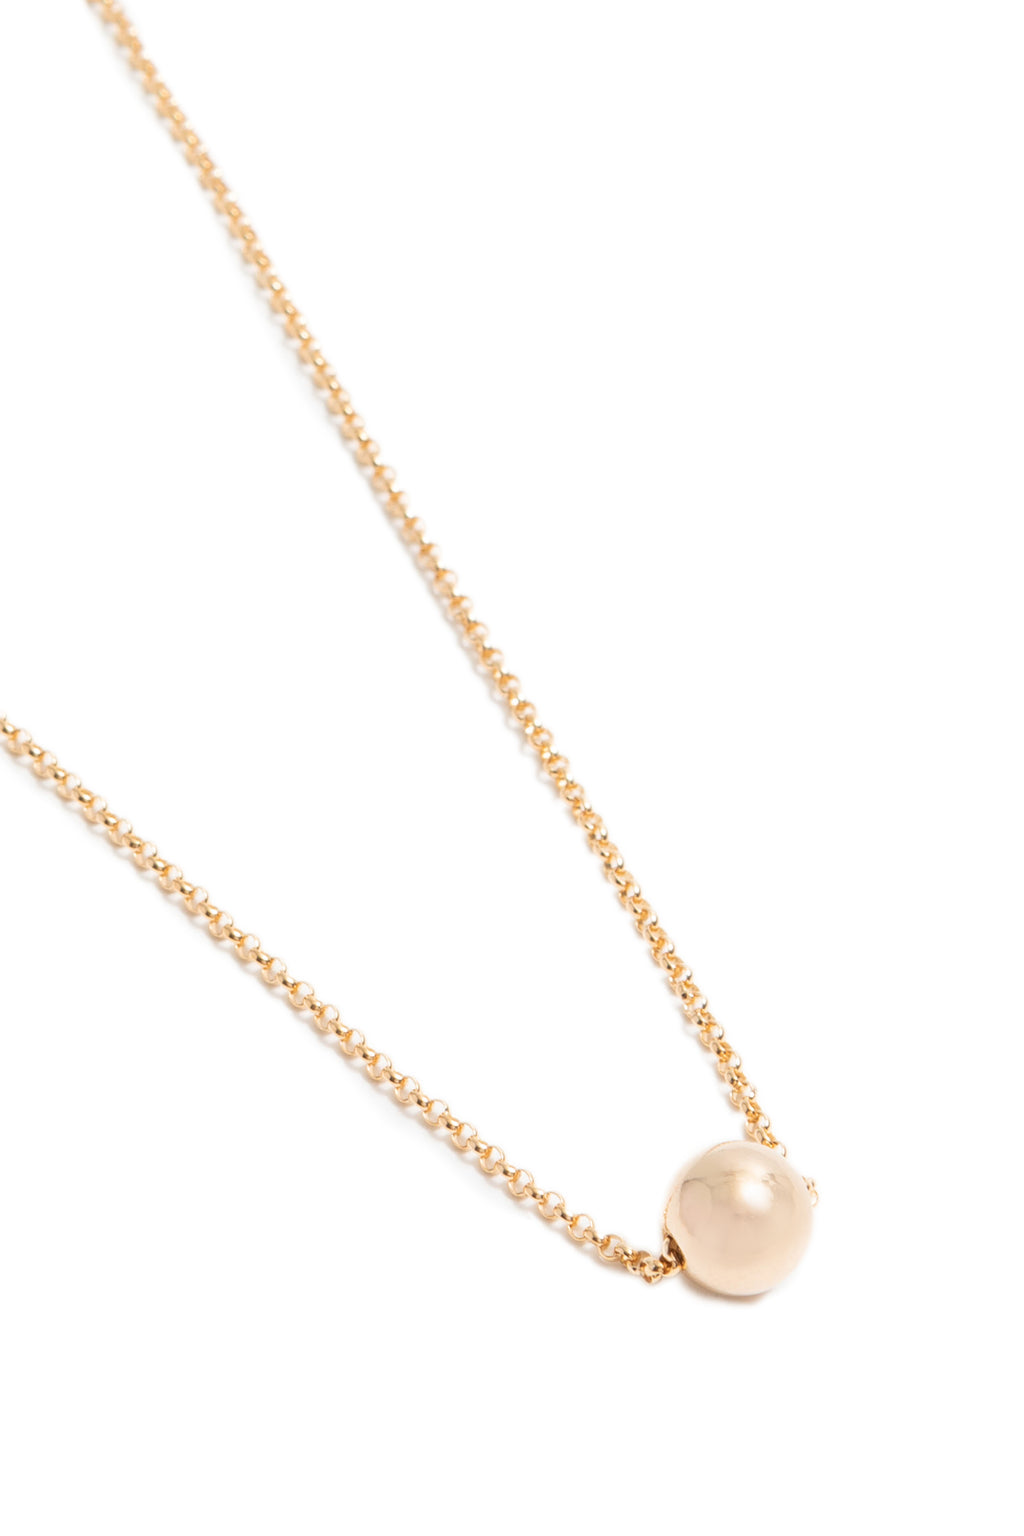 CAT LUCK Small 14K Gold Fill Orb Necklace